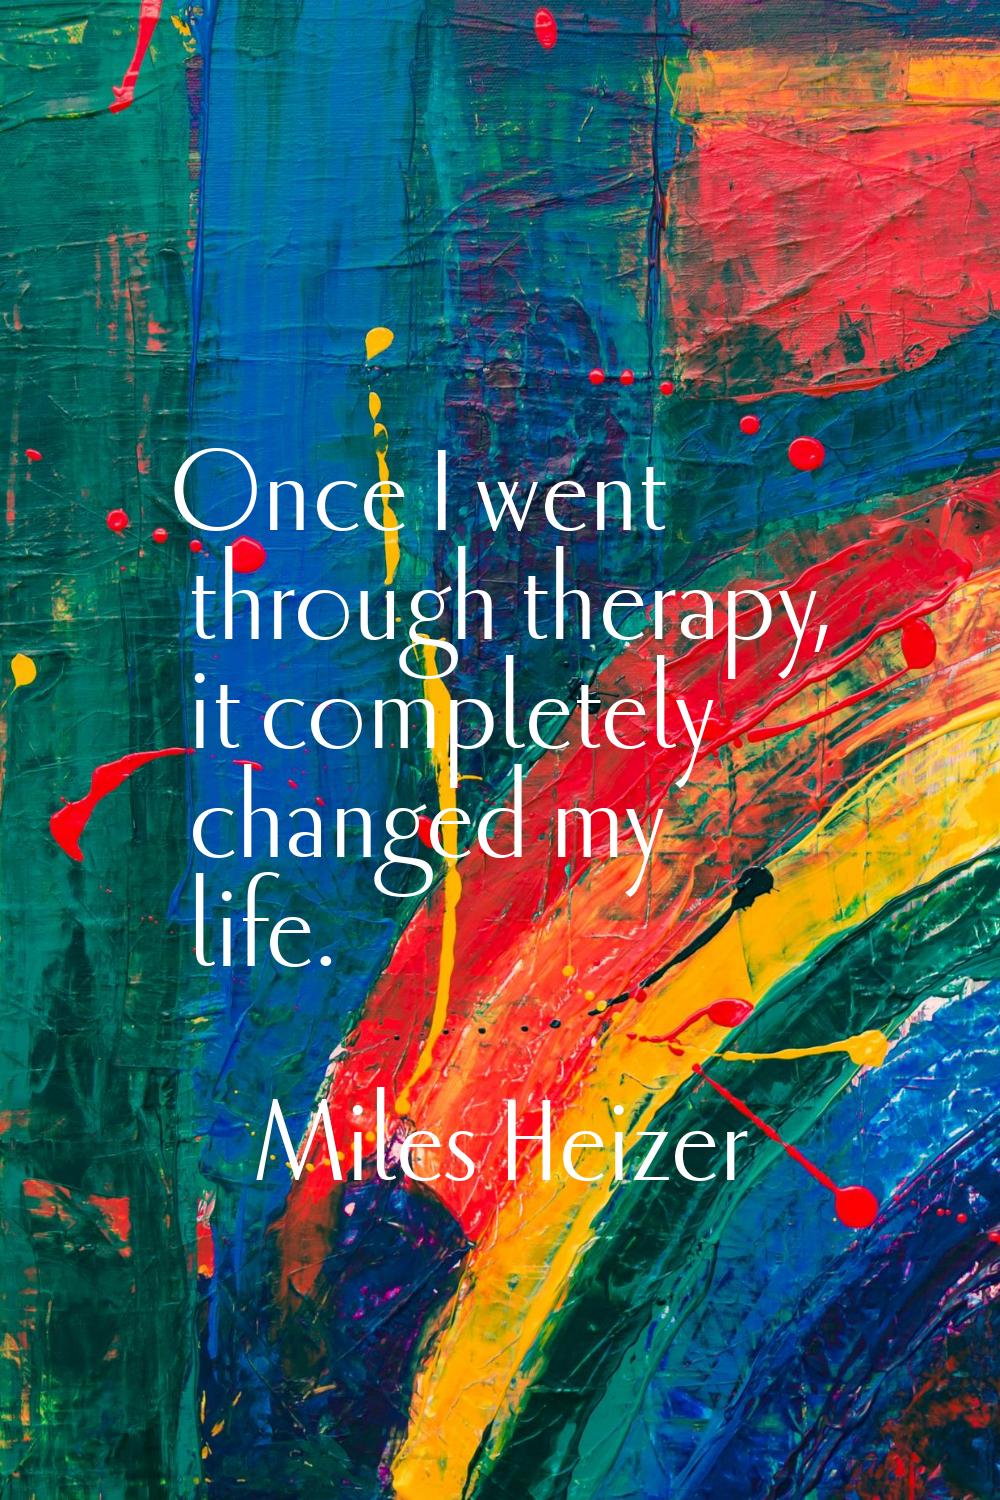 Once I went through therapy, it completely changed my life.